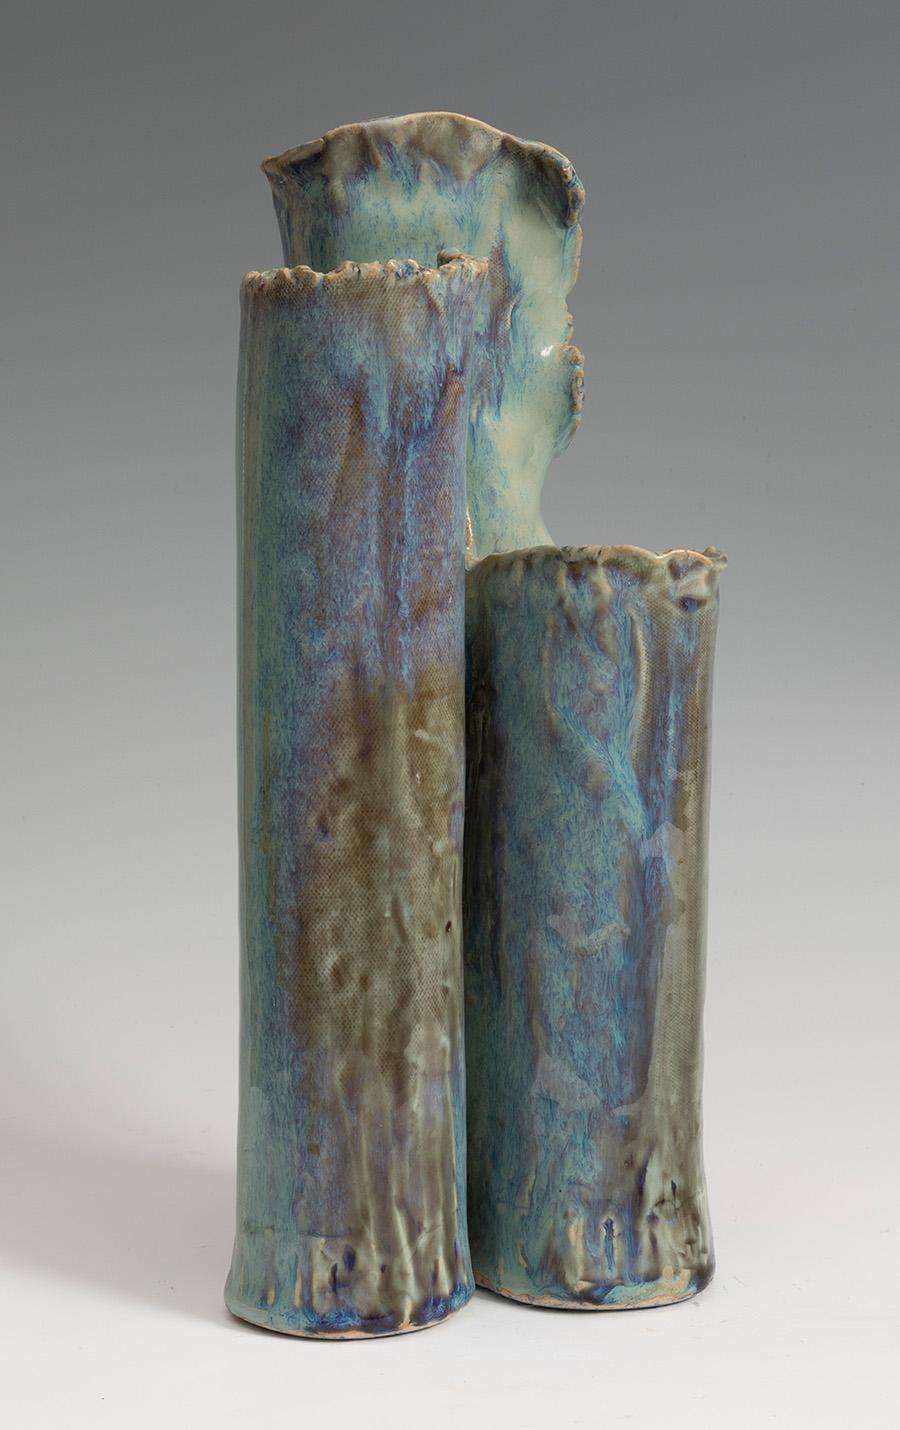 Donna craven, 1983 glazed enameled abstract earthenware pottery vase with three main organic recipients reminiscent of plants stalks.
   